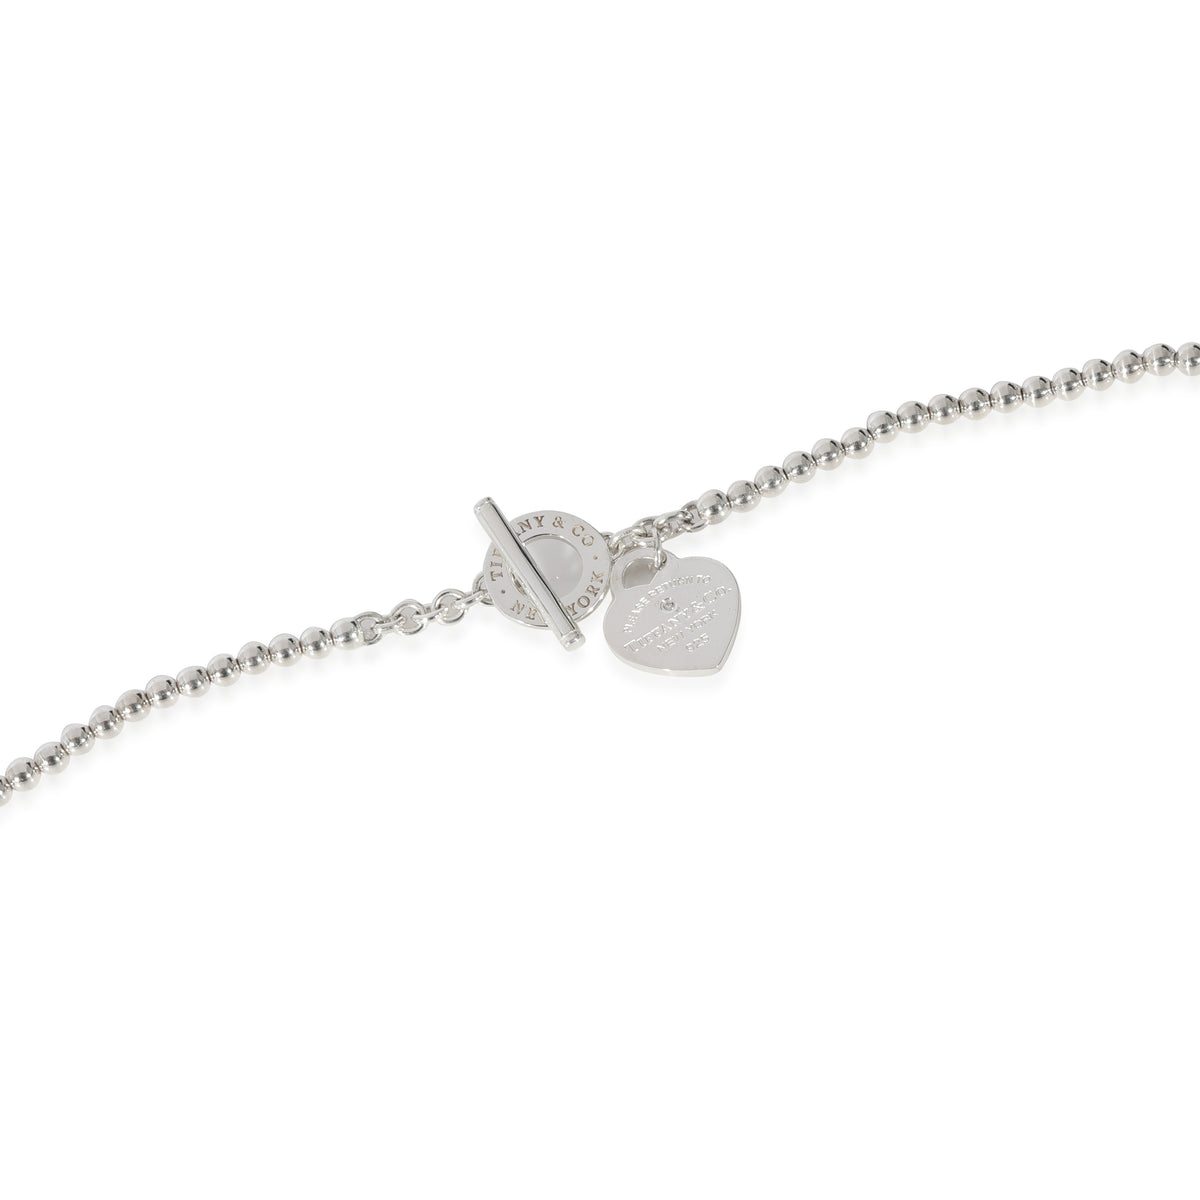 Tiffany & Co. Return To Tiffany Wrap Necklace in Sterling Silver & Pearls